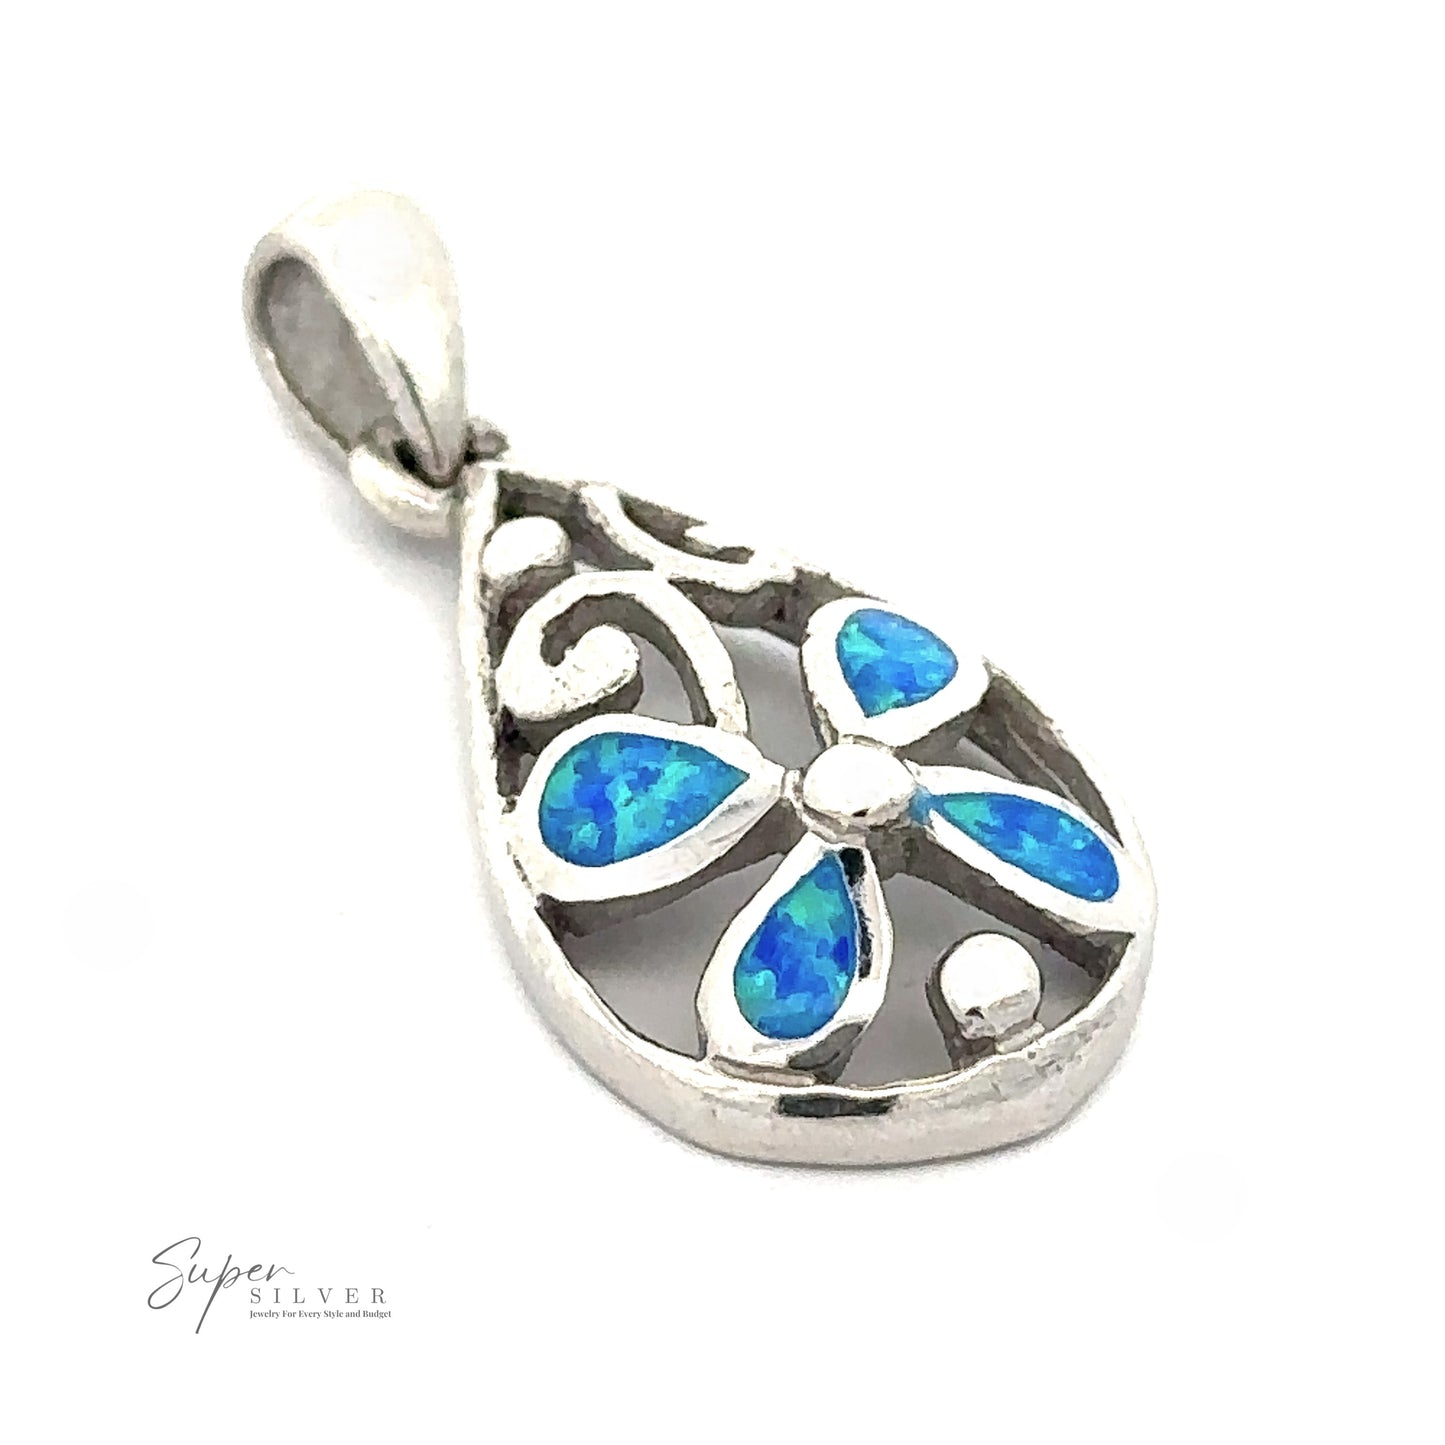 
                  
                    A Teardrop Blue Opal Pendant With Flower Design, featuring lab-created blue Opal gemstone inlays in a teardrop shape, is displayed against a white background. The rhodium finish adds a touch of elegance. The logo "Super Silver" is visible in the bottom left corner.
                  
                